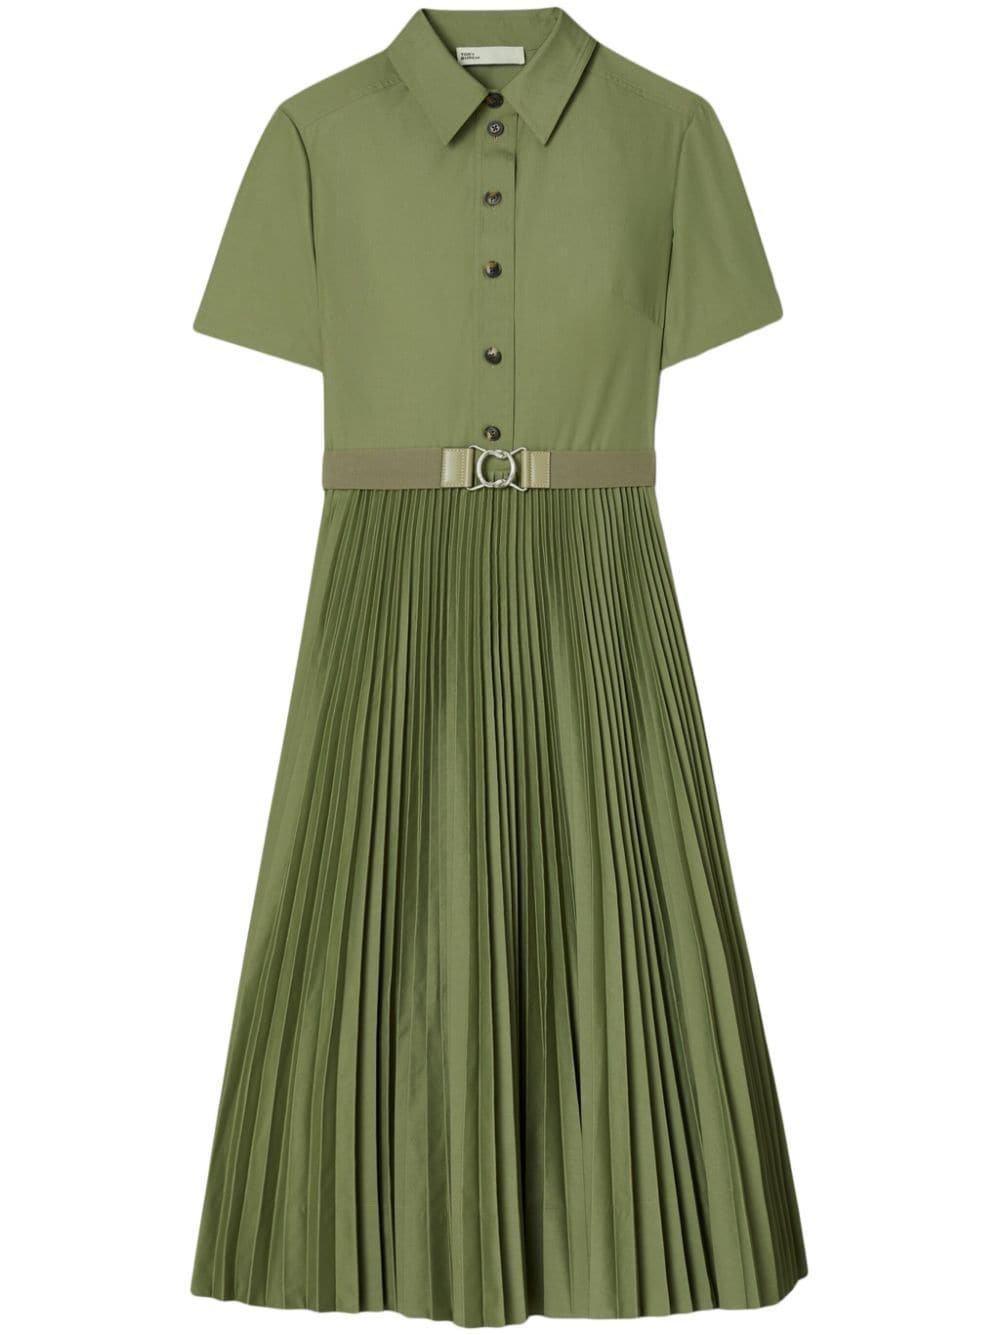 Tory Burch belted pleated dress - Green von Tory Burch